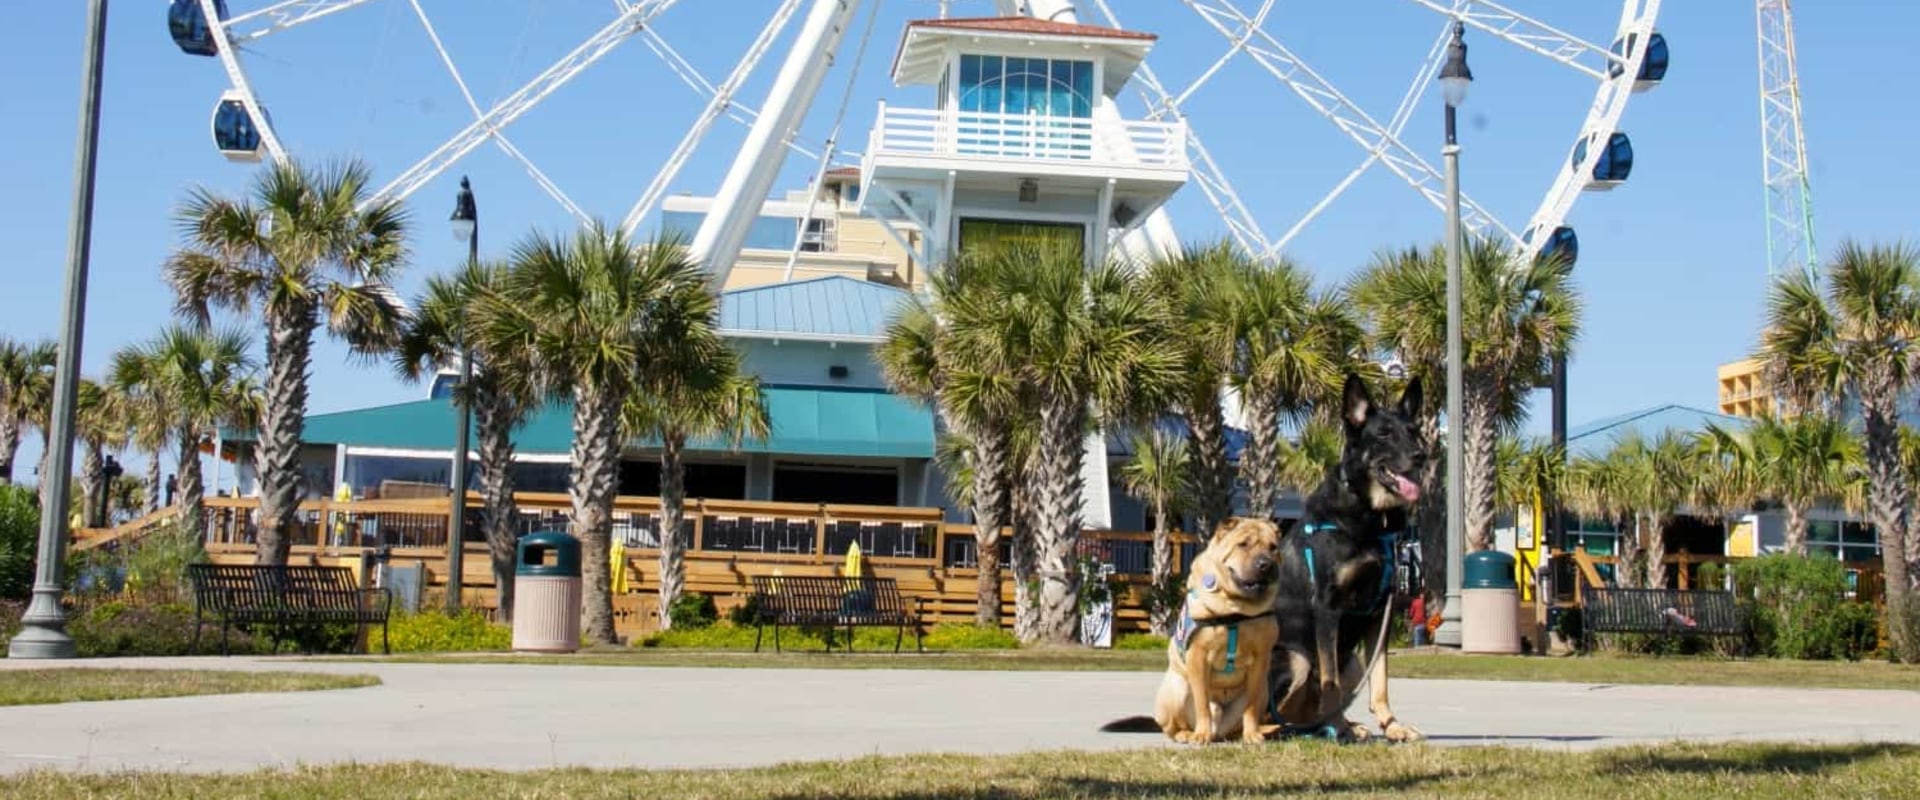 Can Dogs Enjoy a Vacation in Myrtle Beach?